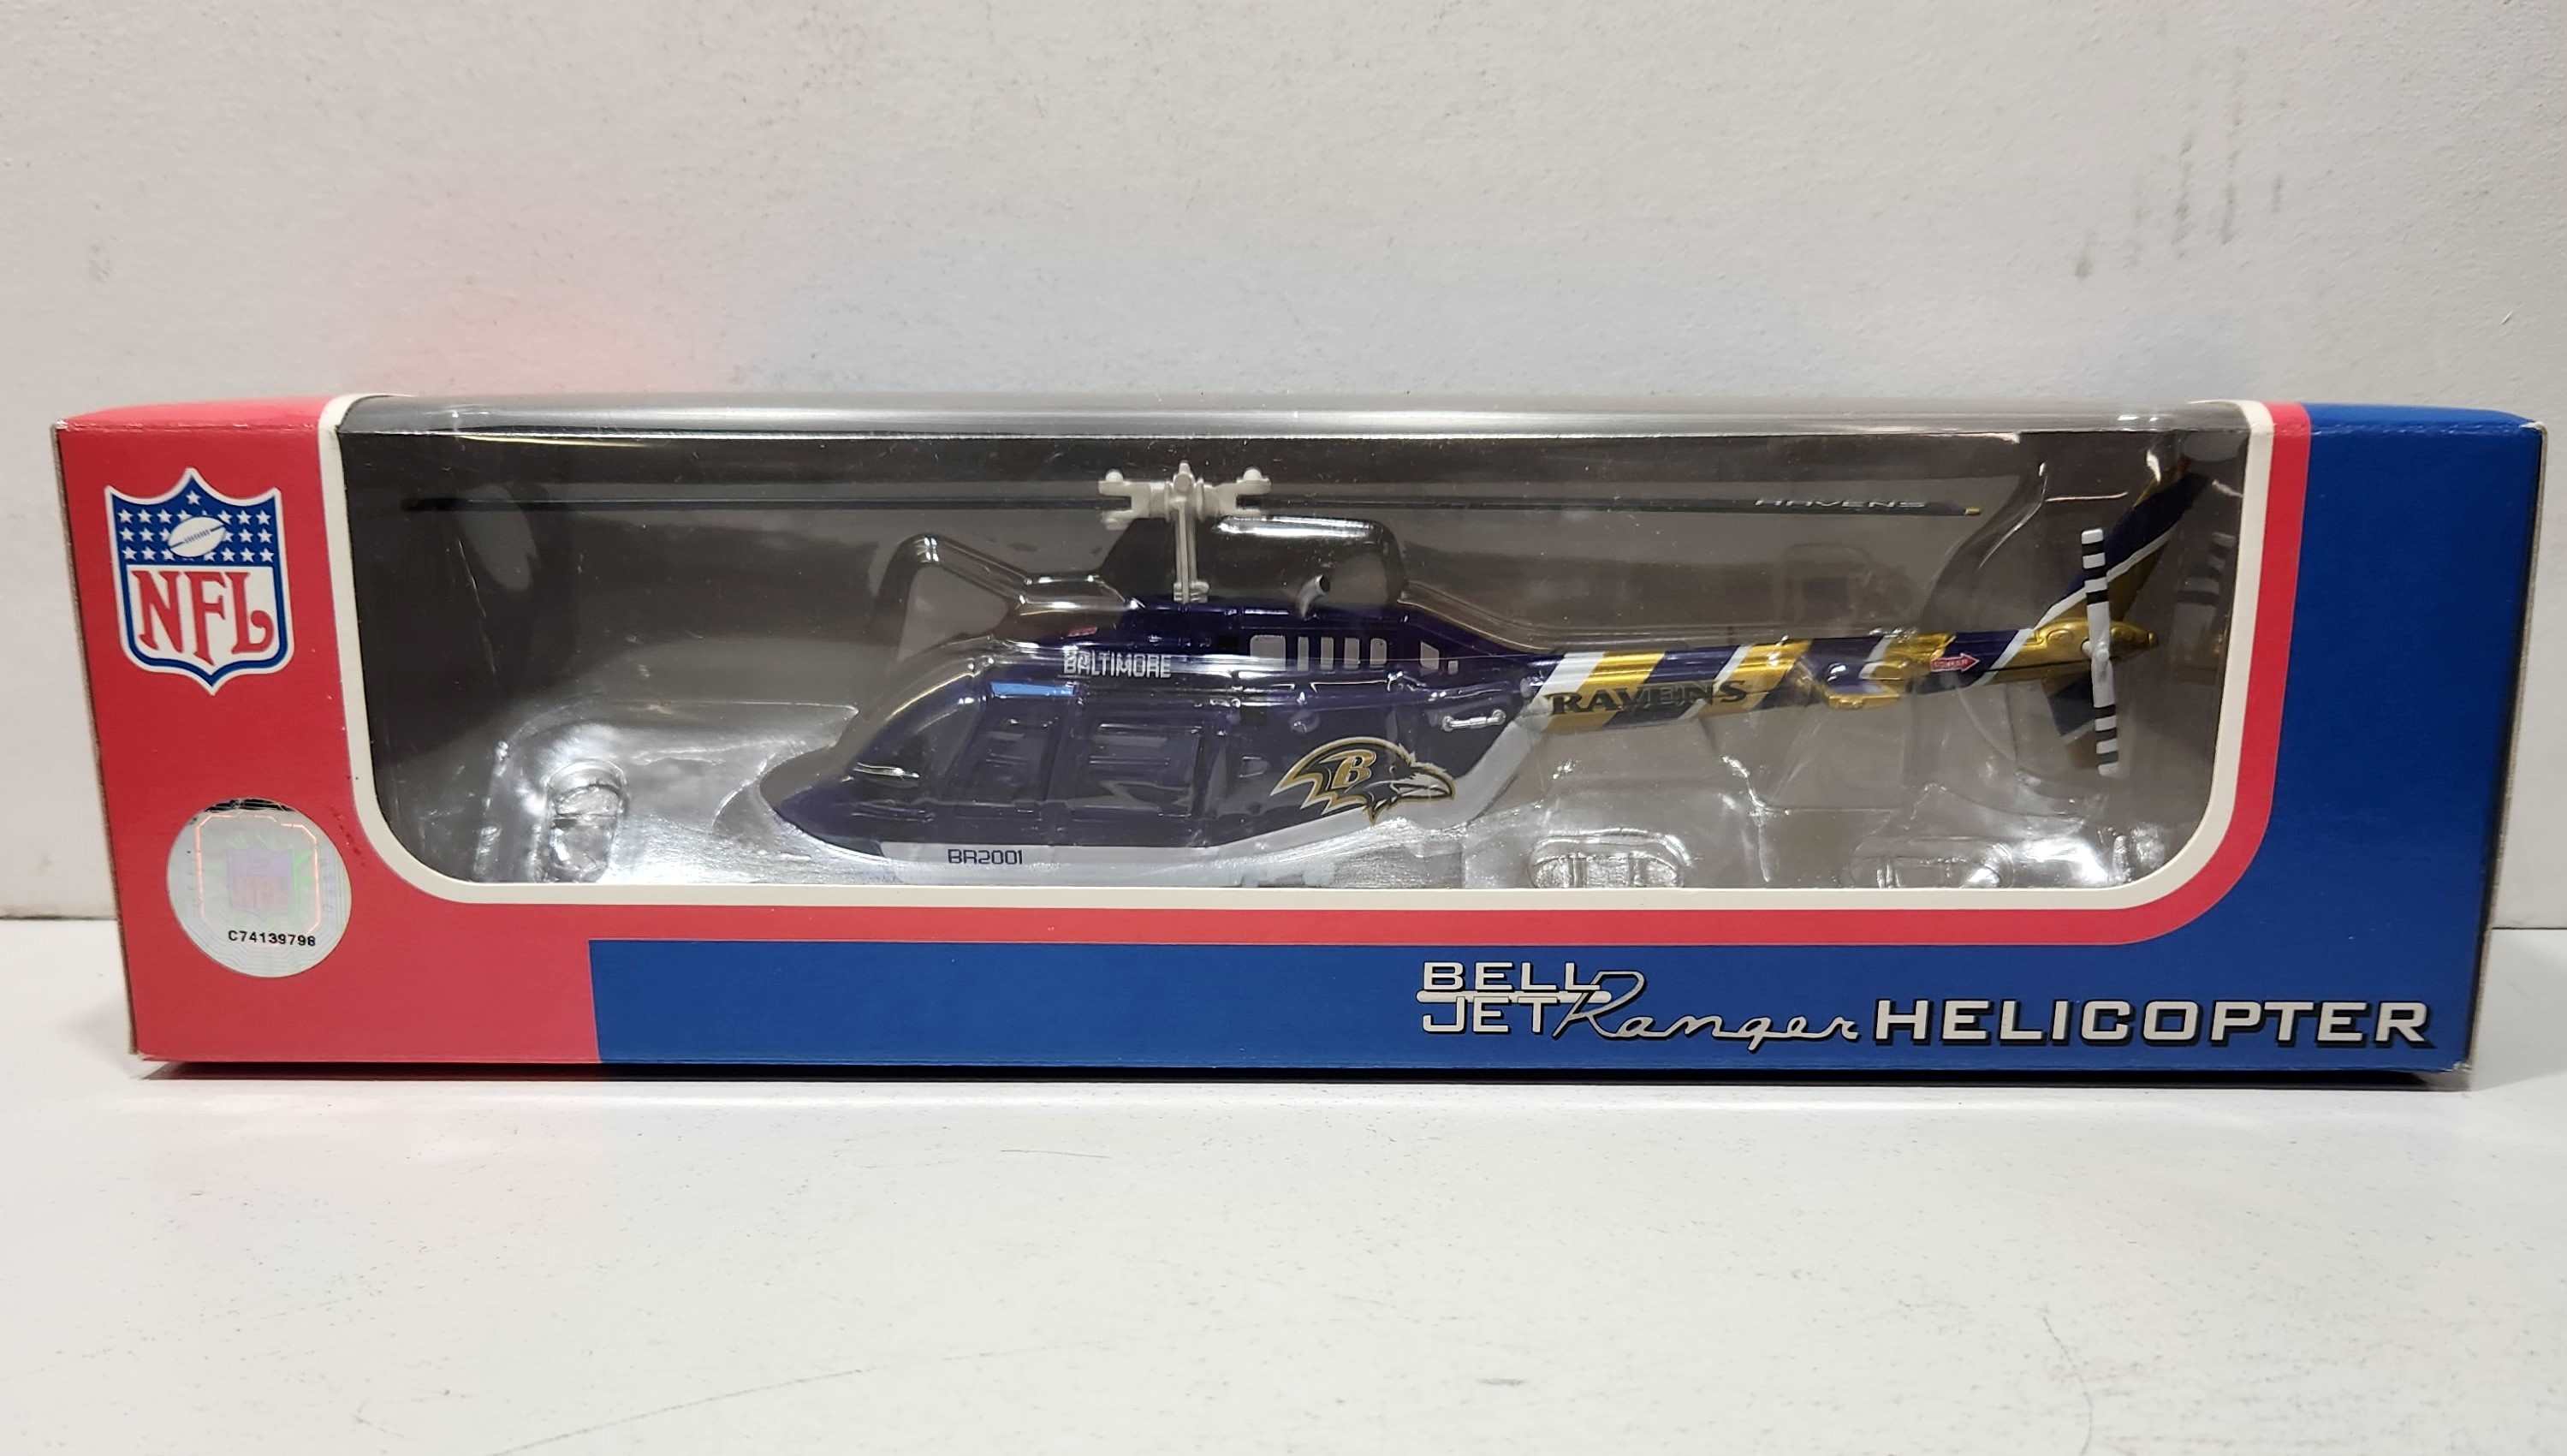 2001 Baltimore Ravens 1/43rd Helicopter